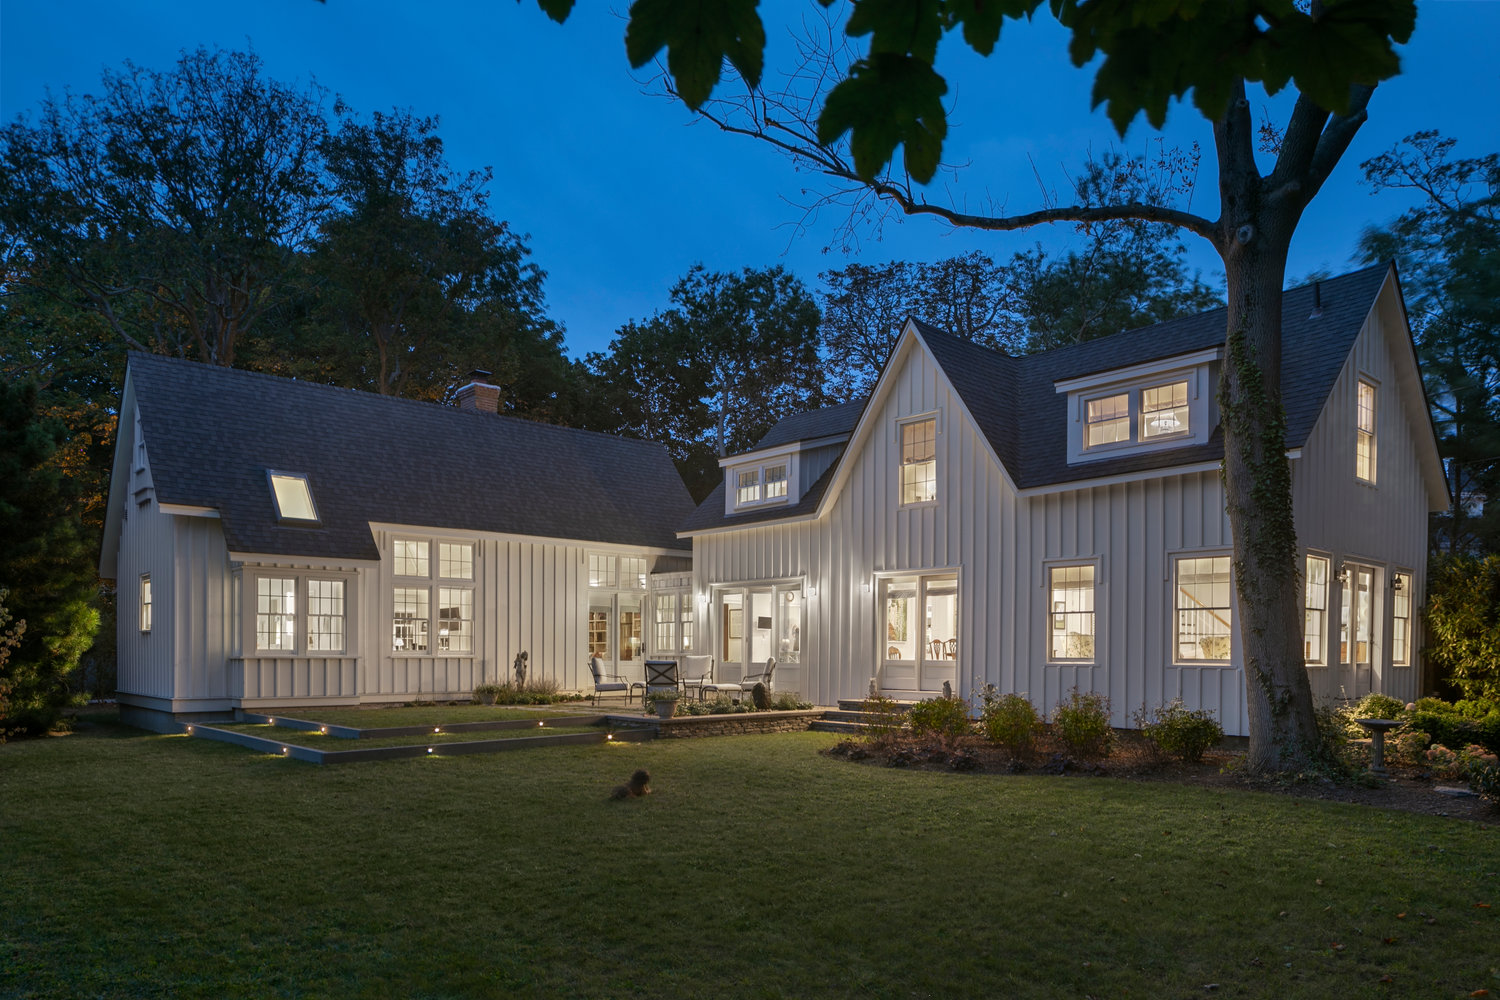 This renovated Newport property consists of an historic barn from the 1850s (right), connected to a new wing (left) that allowed an older couple to sell their grand main residence, subdivide their lot and retire to the cozy barn out back.